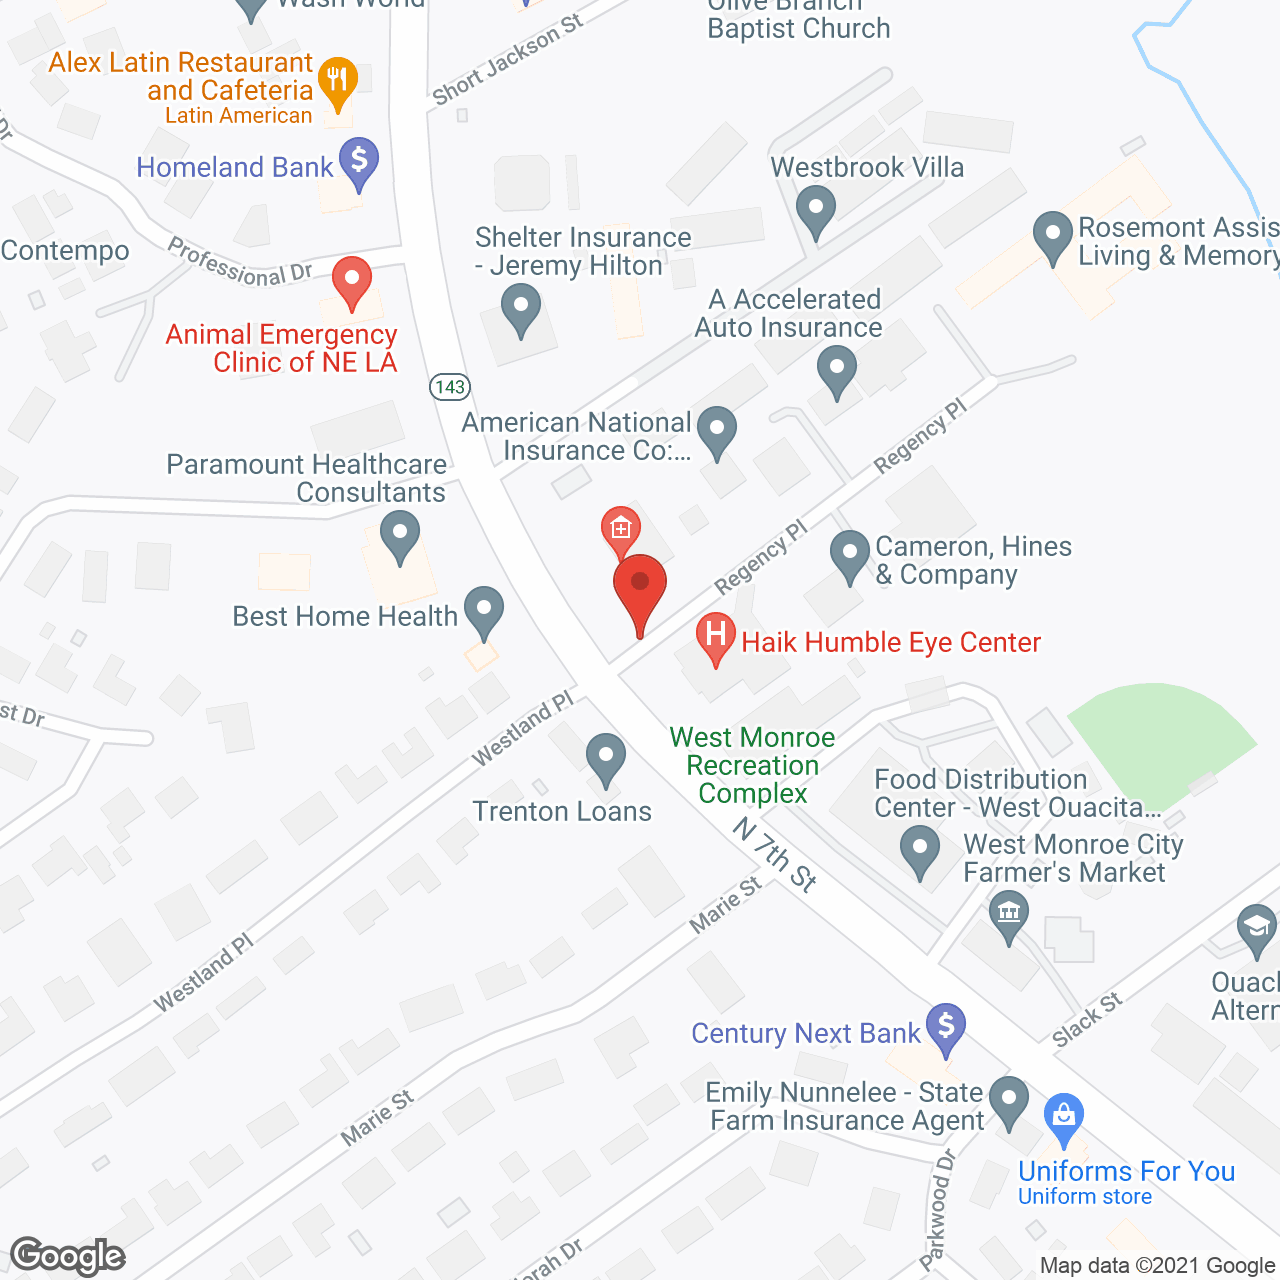 The Rosemont in google map